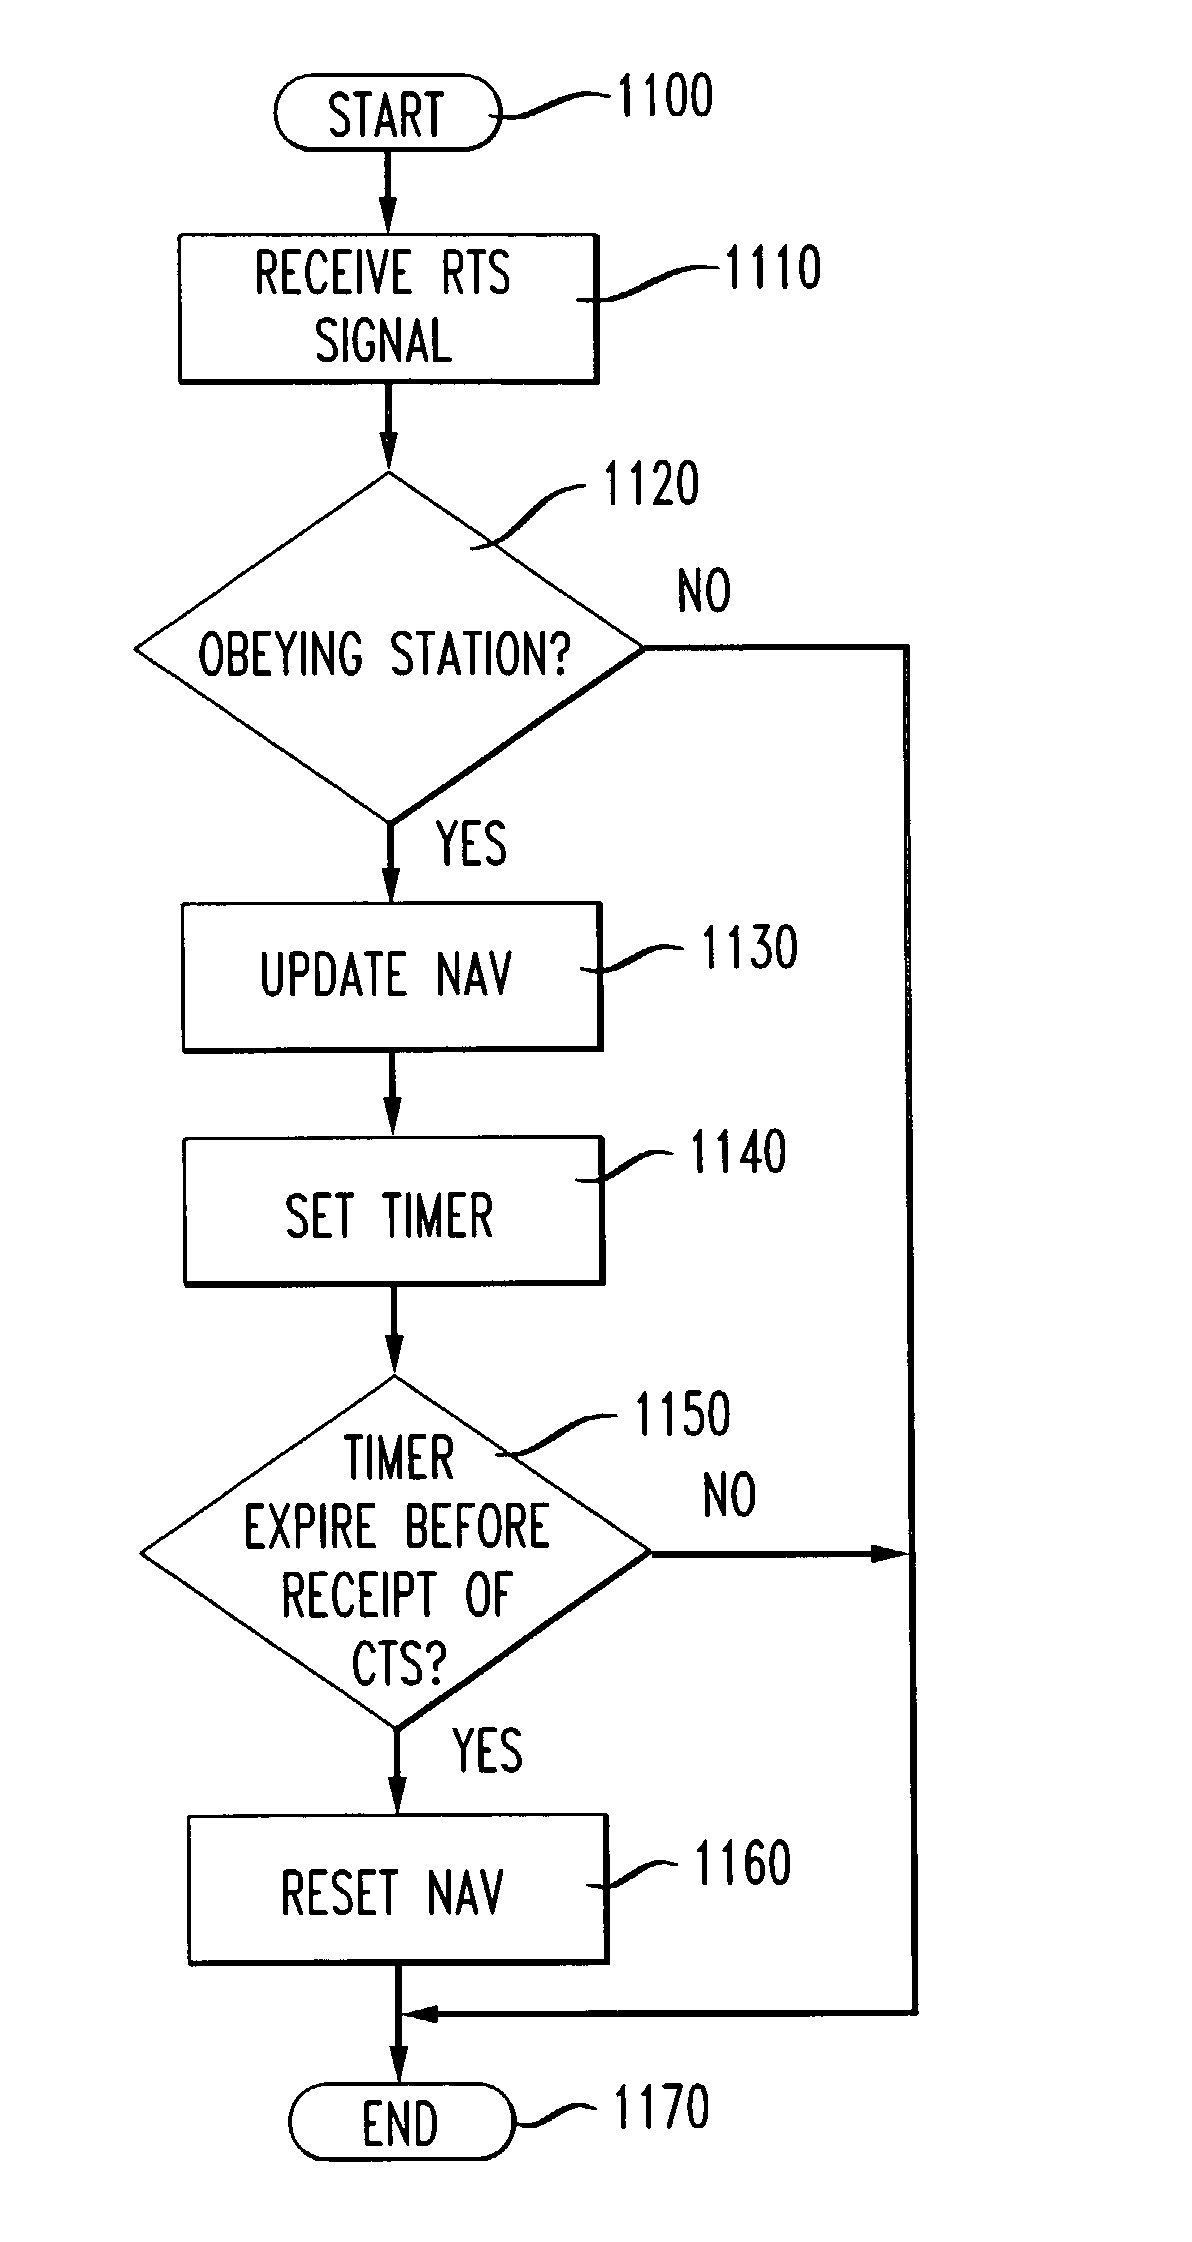 Interference suppression methods for 802.11